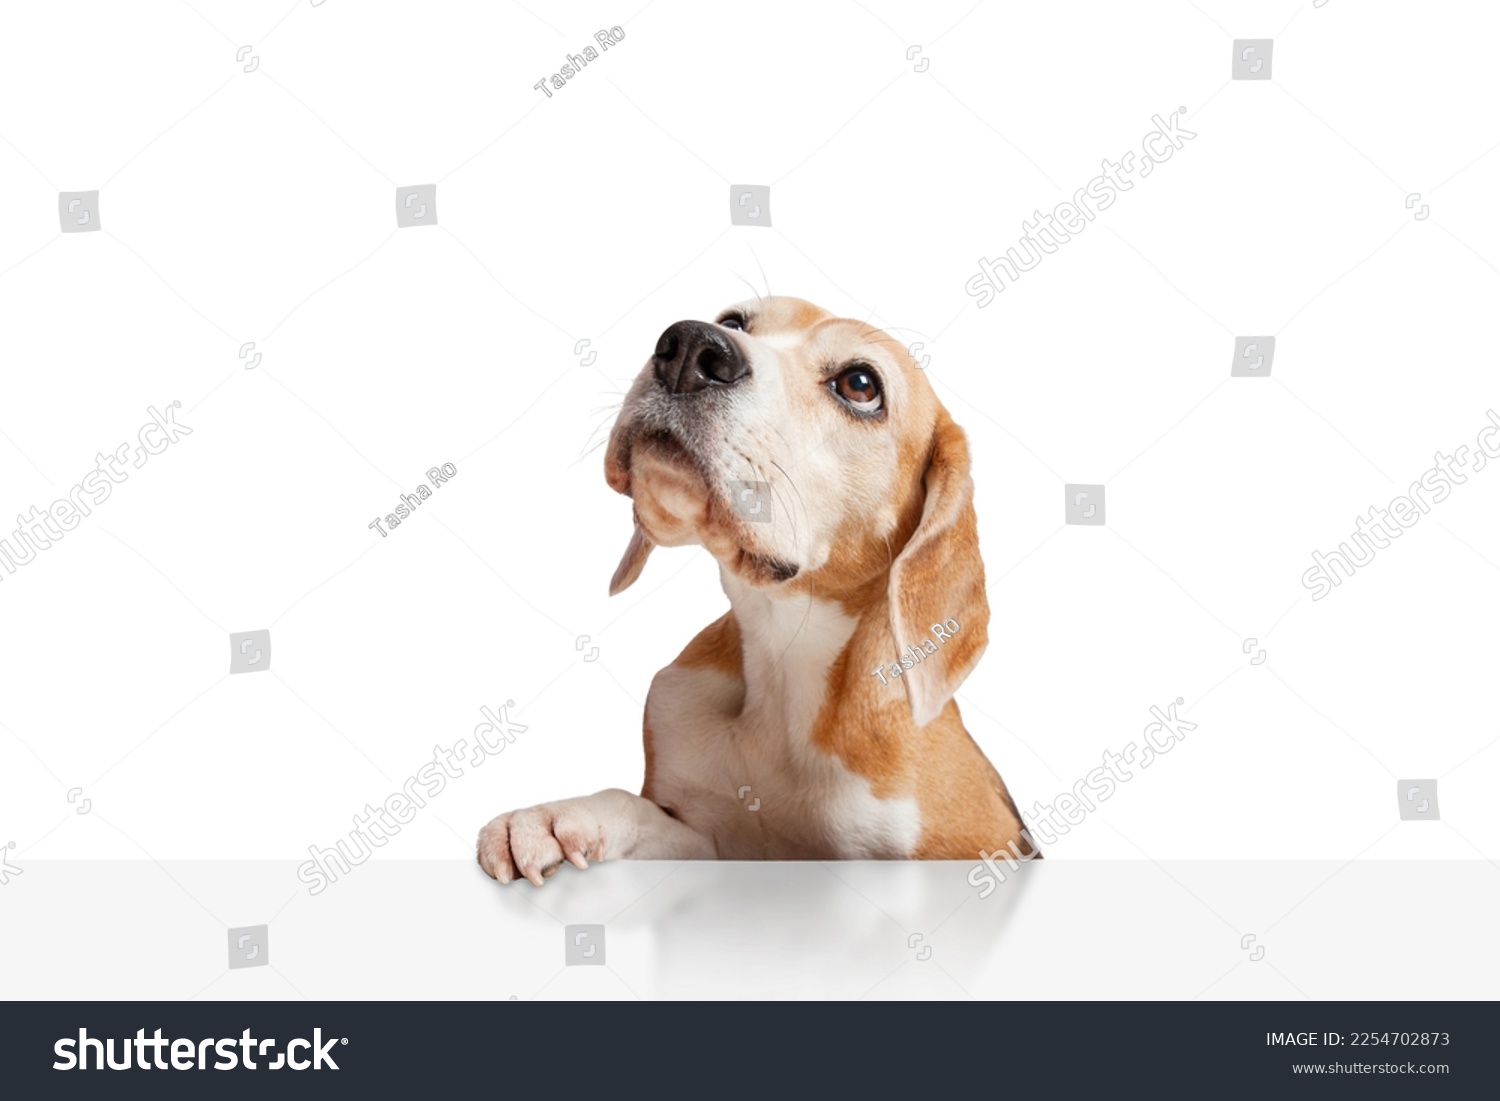 A beagle dog looking up with paws hanging over white table. Isolated on white background. Copy space. Suitable for collage and banner making and any other design #2254702873